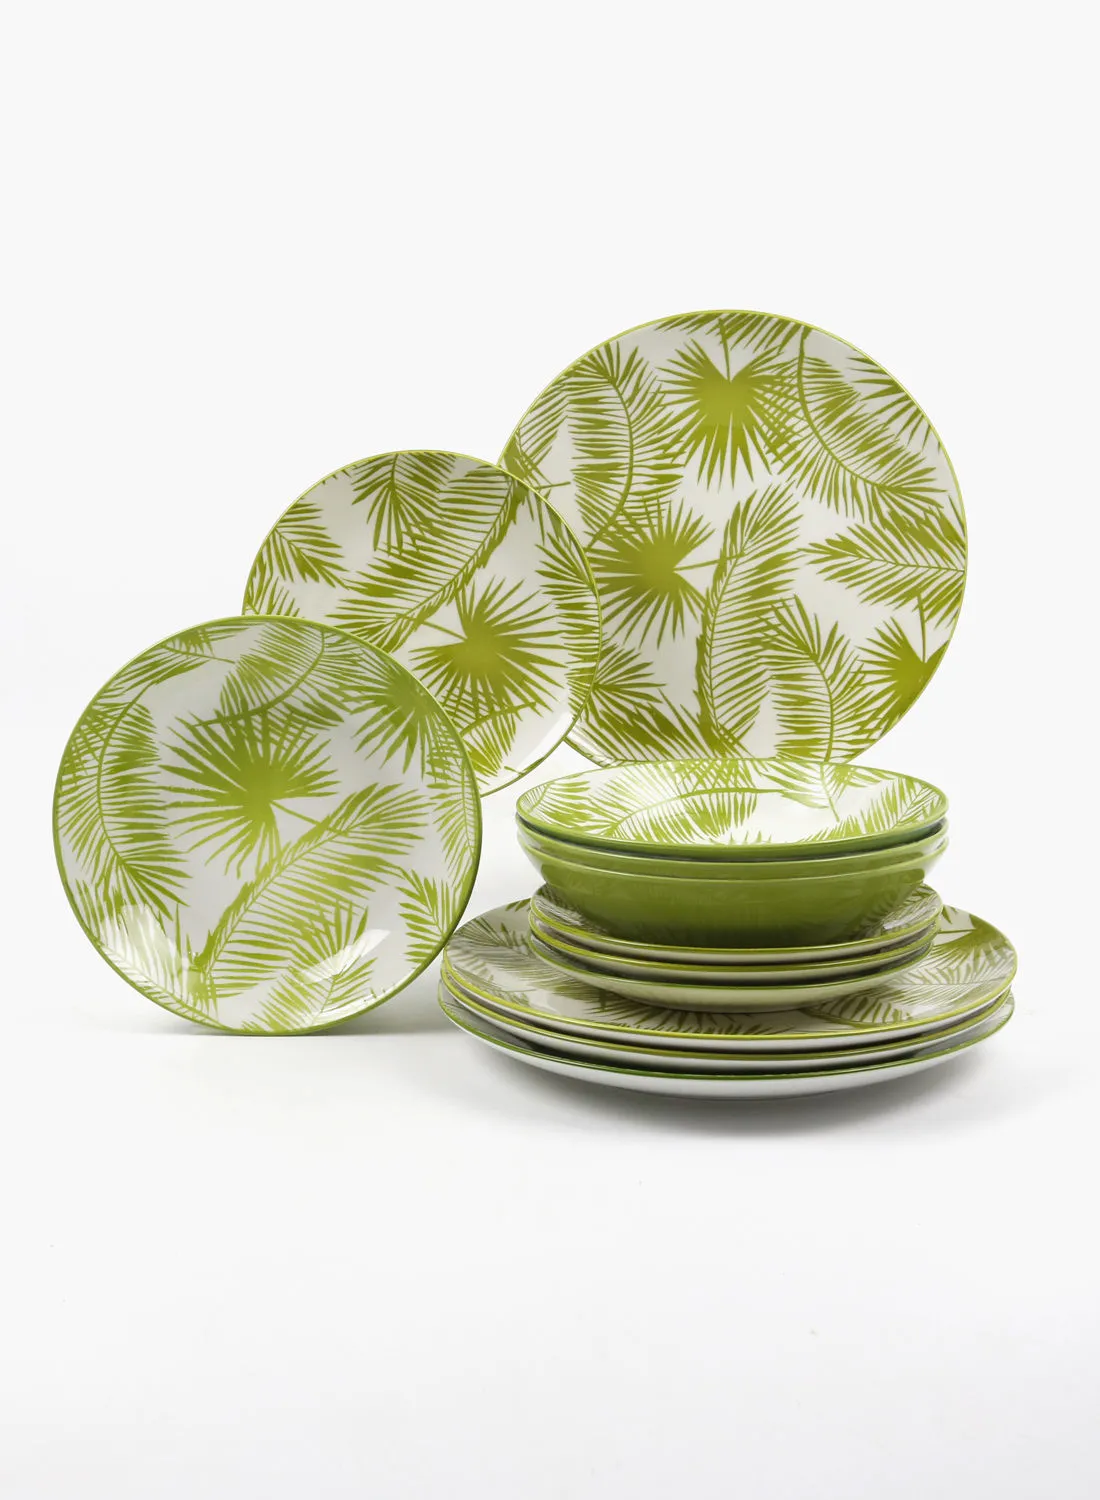 noon east 12 Piece Porcelain Dinner Set - Dishes, Plates - Dinner Plate, Side Plate, Soup Plate - Serves 4 - Printed Design Green Palms